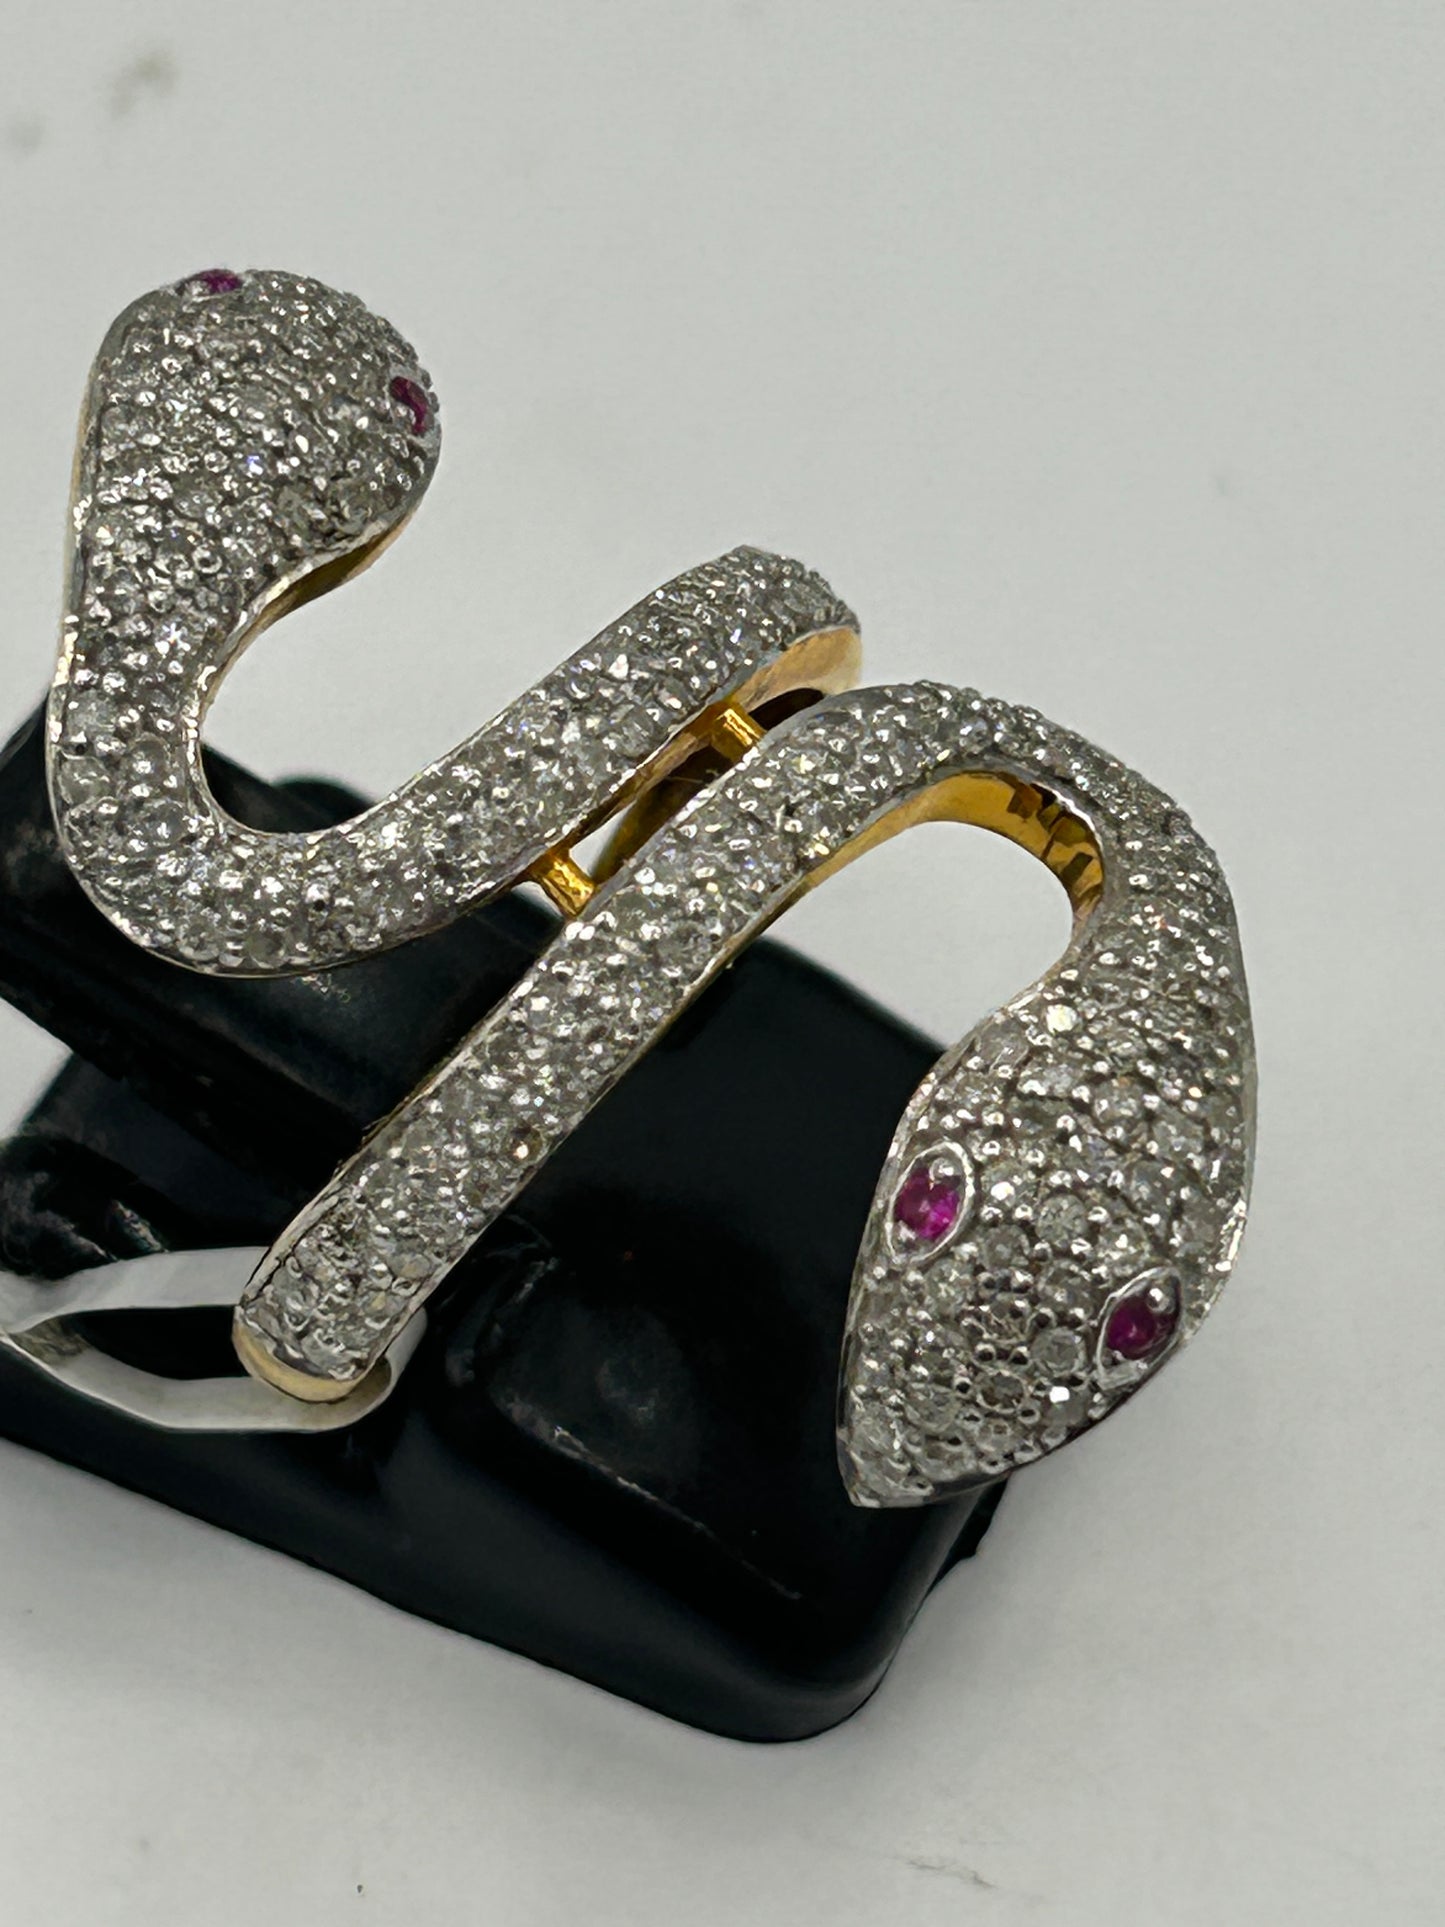 14k Solid Gold Snake Diamond Rings. Genuine handmade pave diamond Rings. Approx Size (28 x 18 mm)